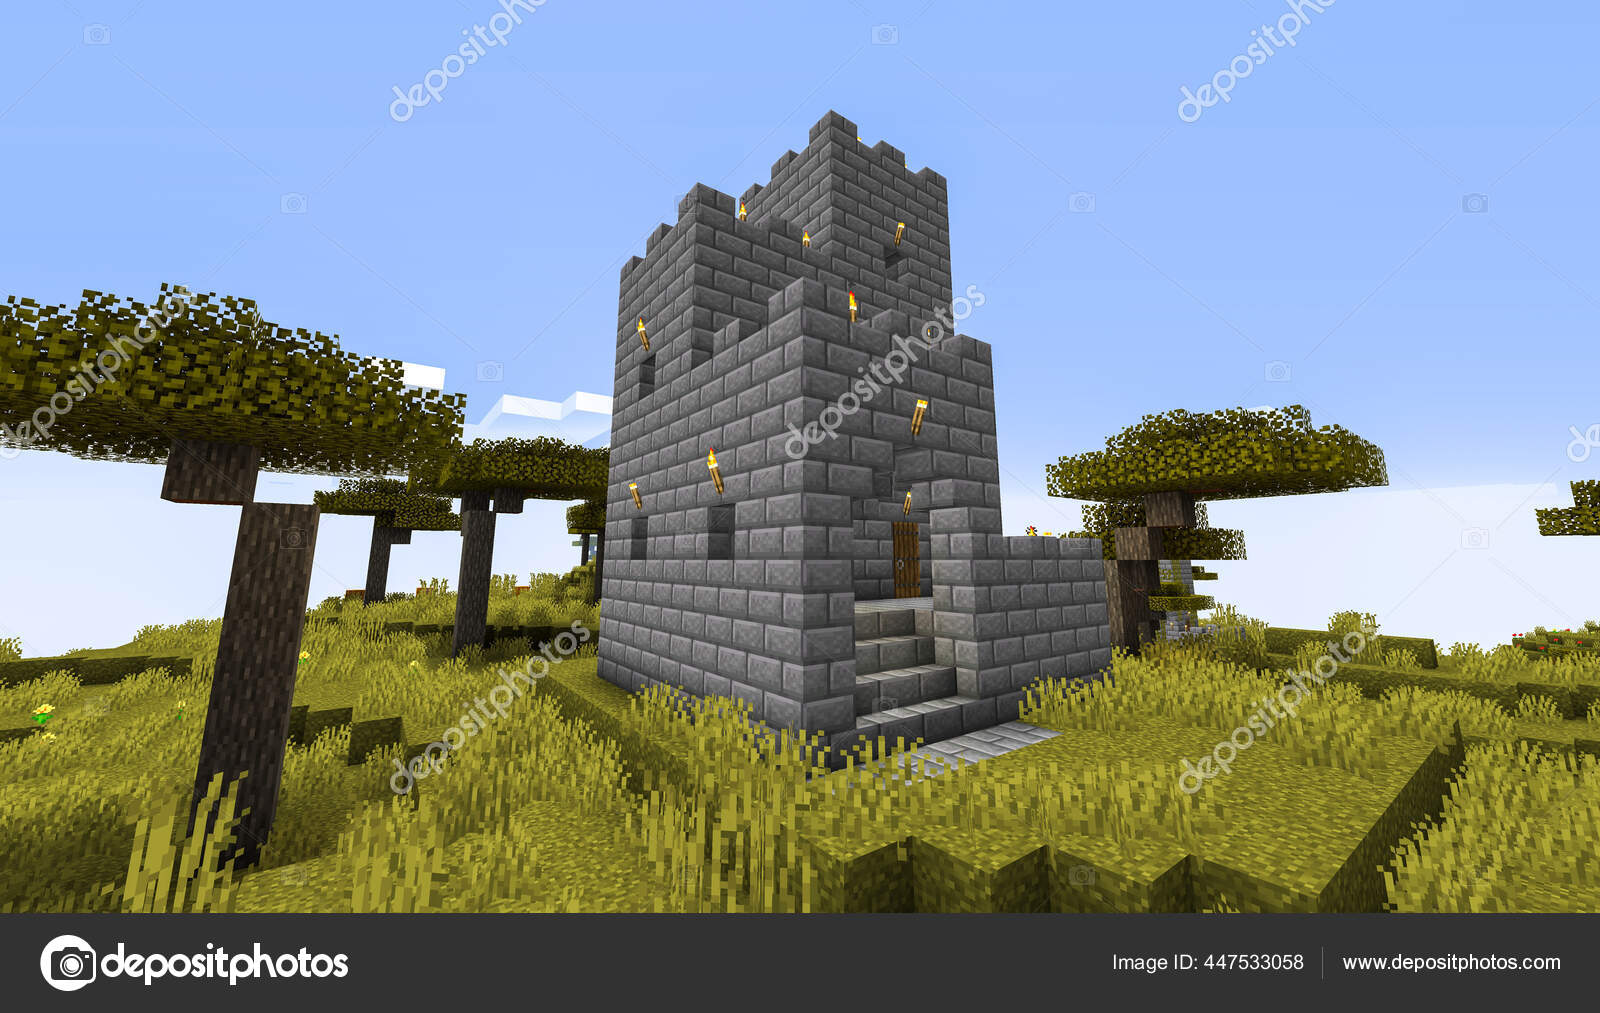 Minecraft Game February 2021 Sample Simply Stone Medieval Castle